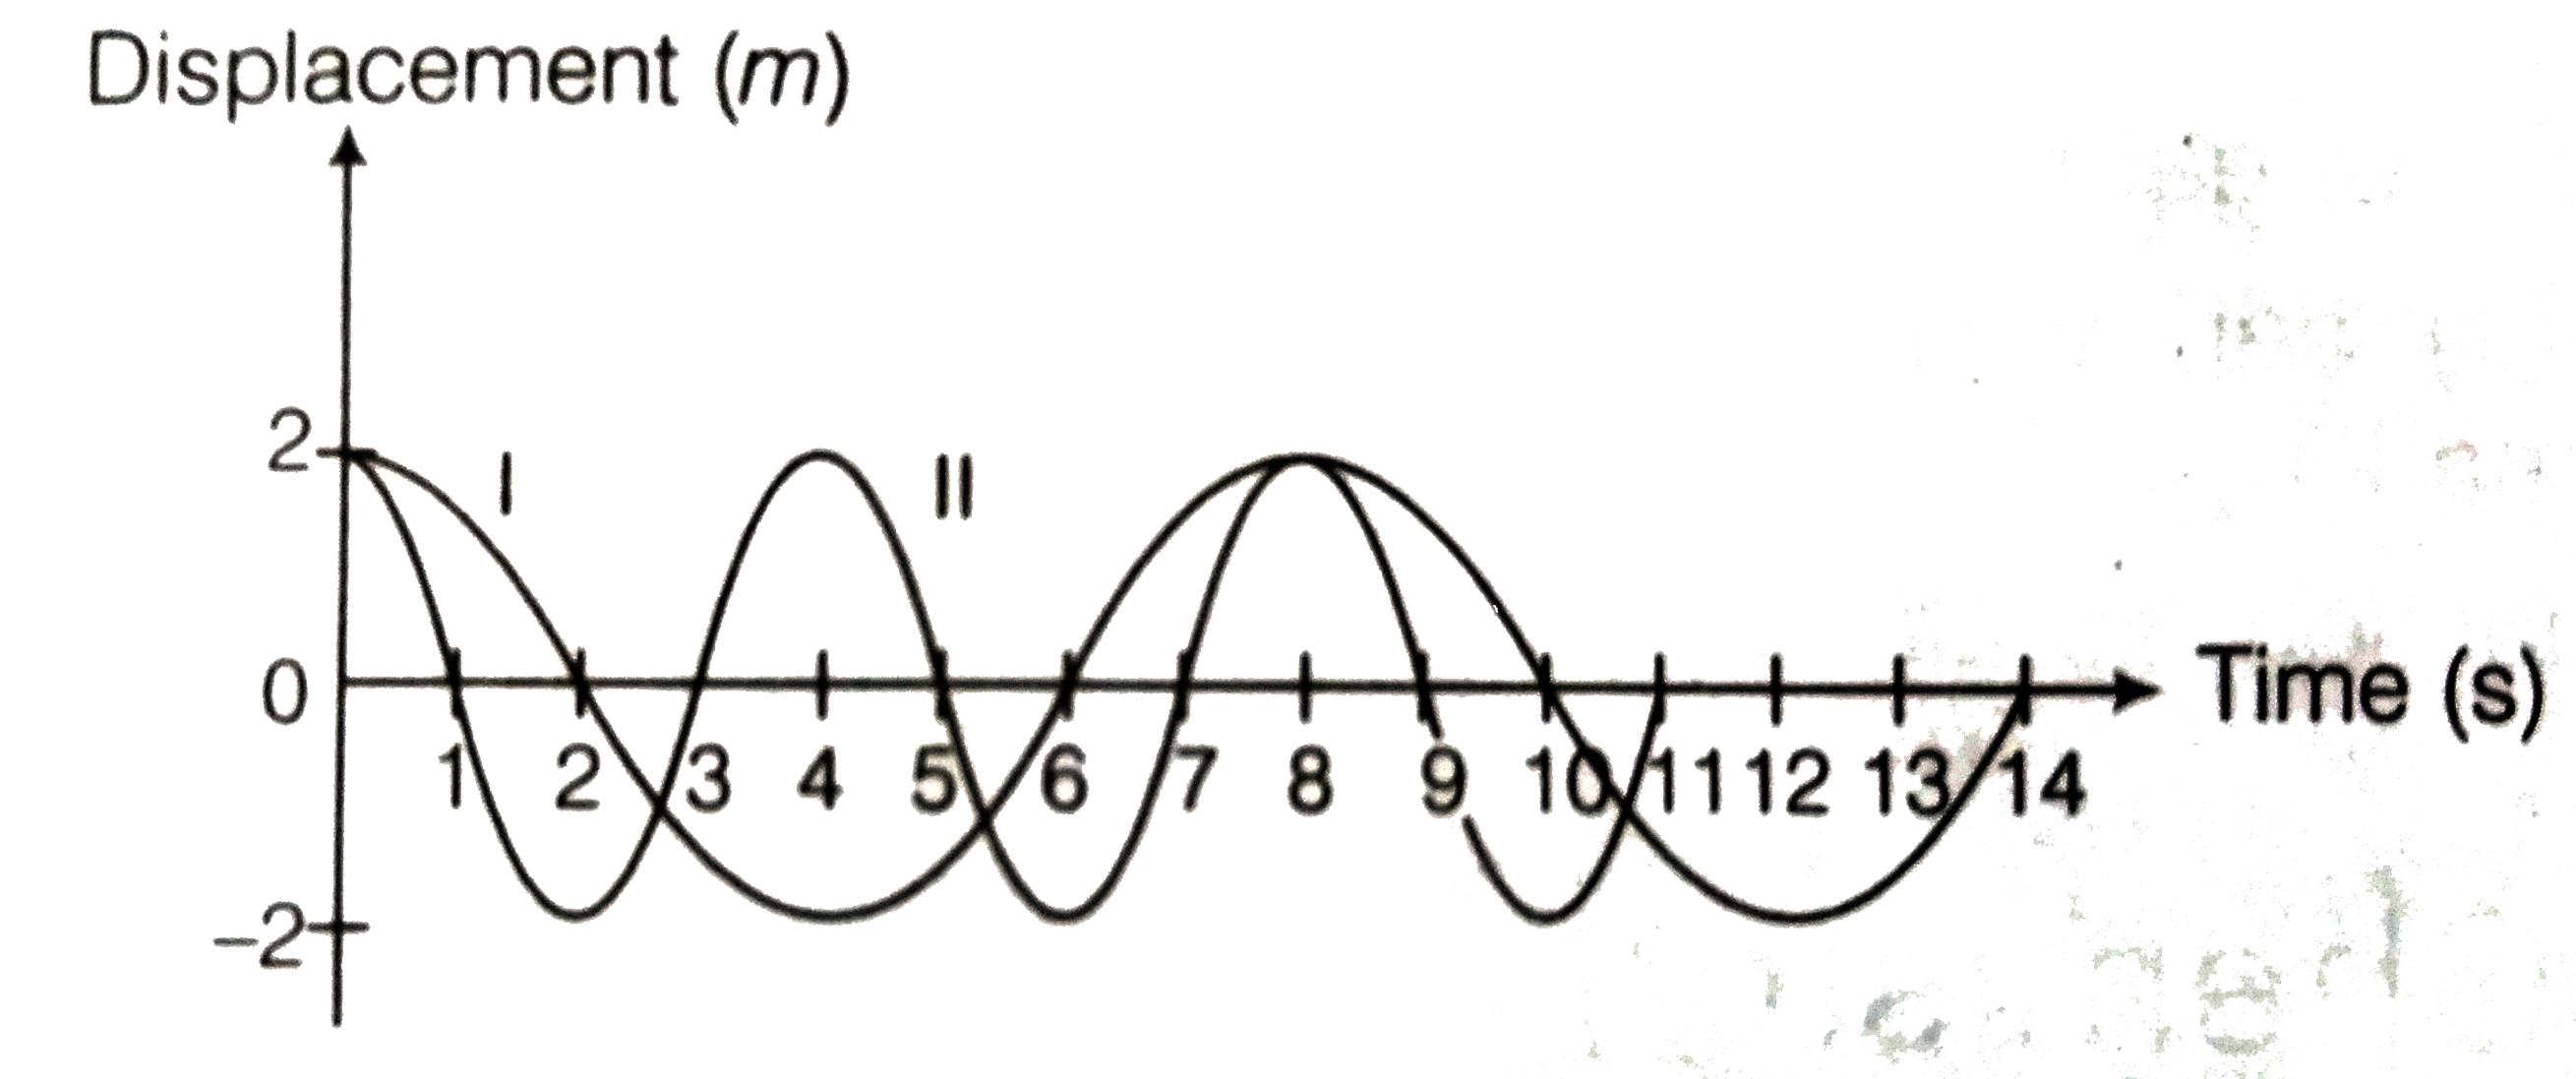 Figure shows the displacement time graphs of two simple harmonic motions I and II. From the graph it follows that